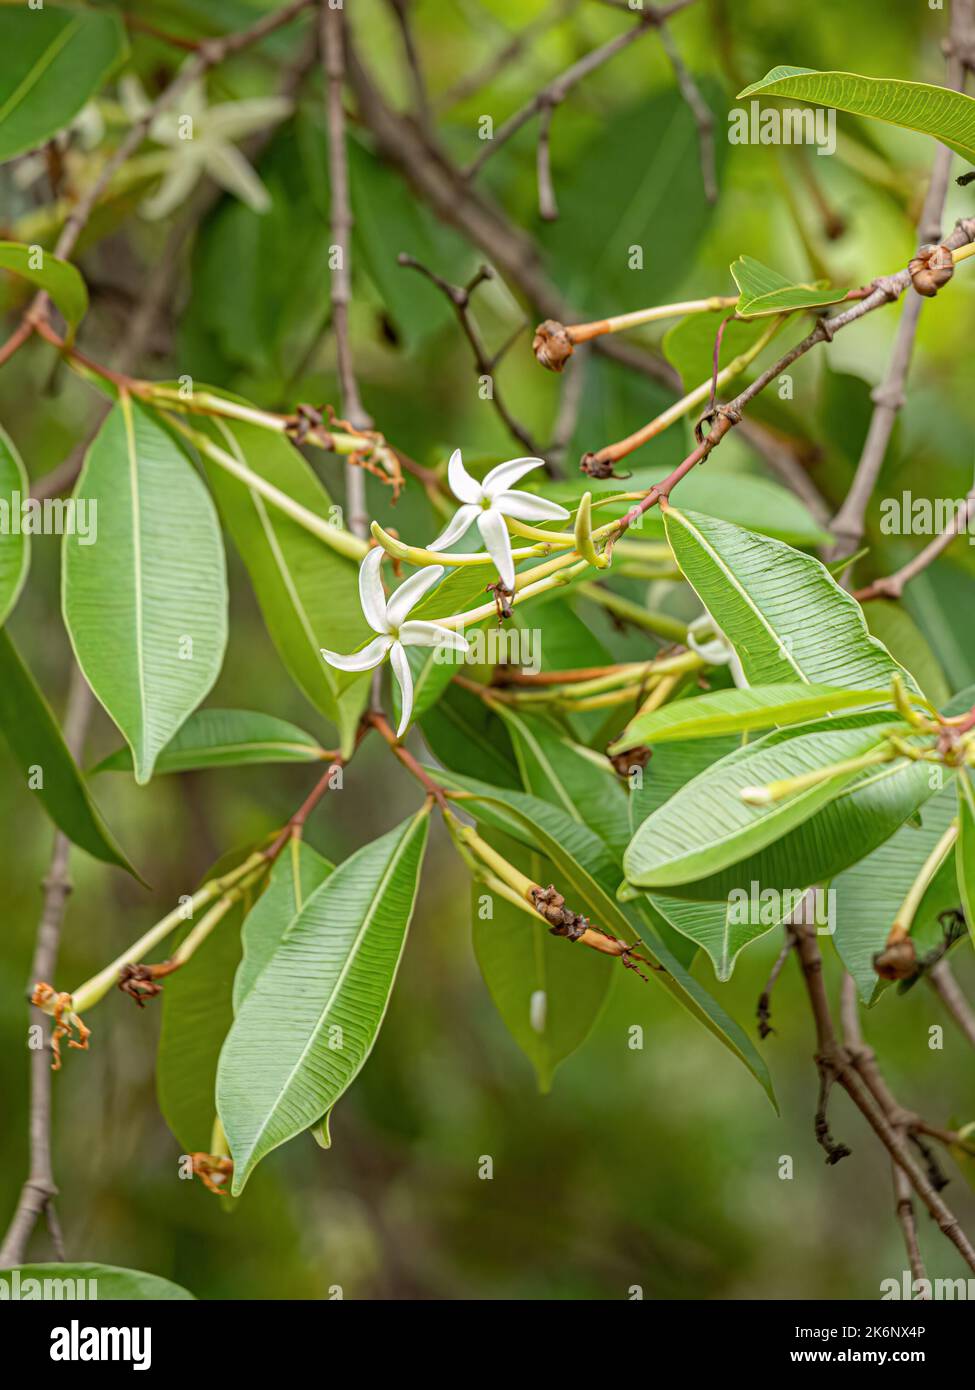 flower of the Tree called Mangaba of the species Hancornia speciosa with selective focus Stock Photo